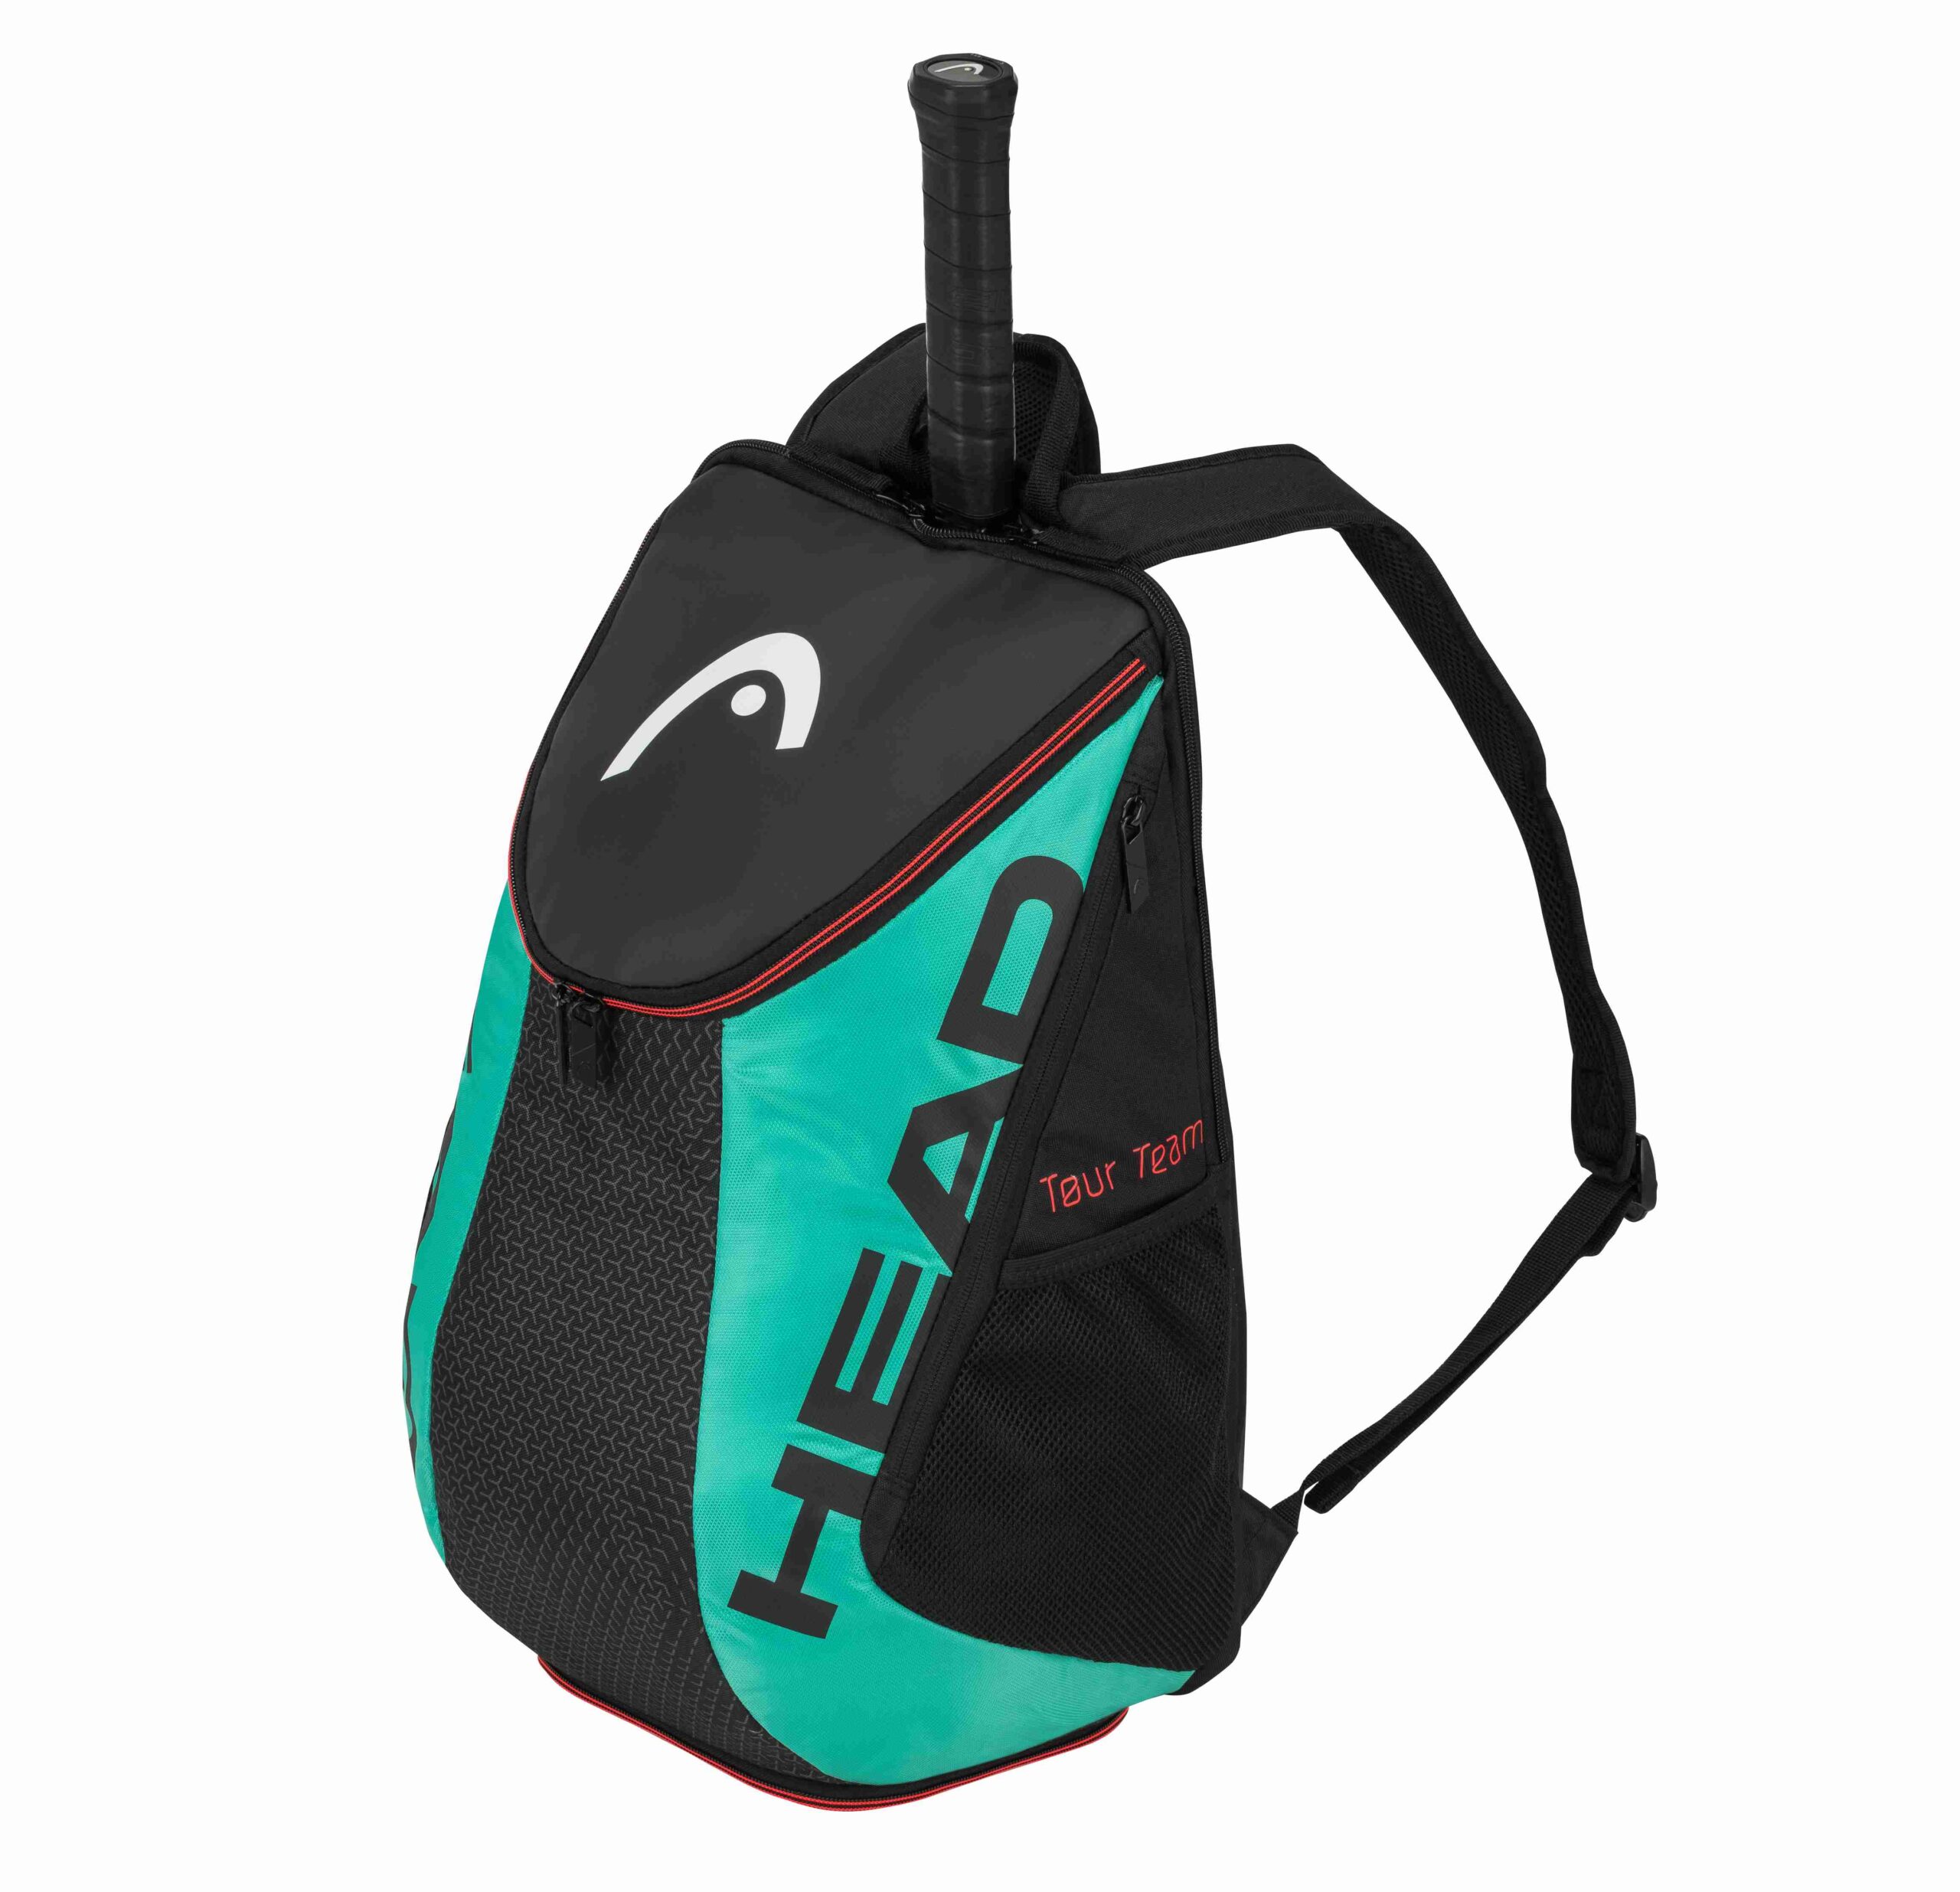 Tennis backpack in black and teal with white HEAD logo on front and HEAD in black writing on the side